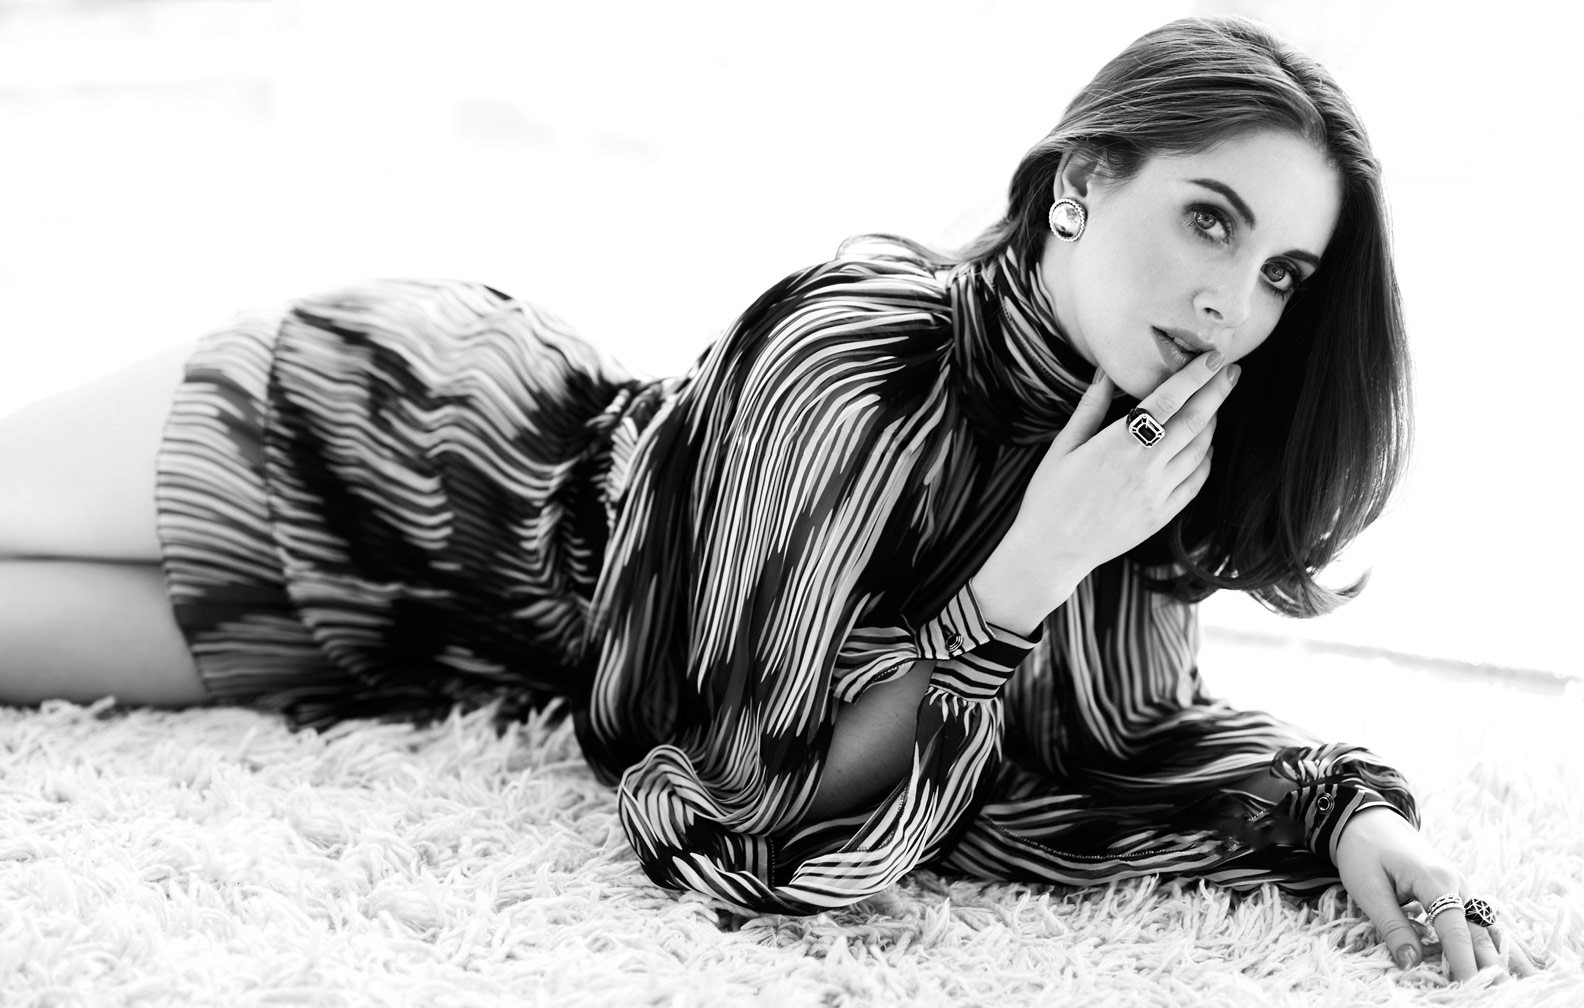 Alison Brie Black and White Photo shoot Wallpapers